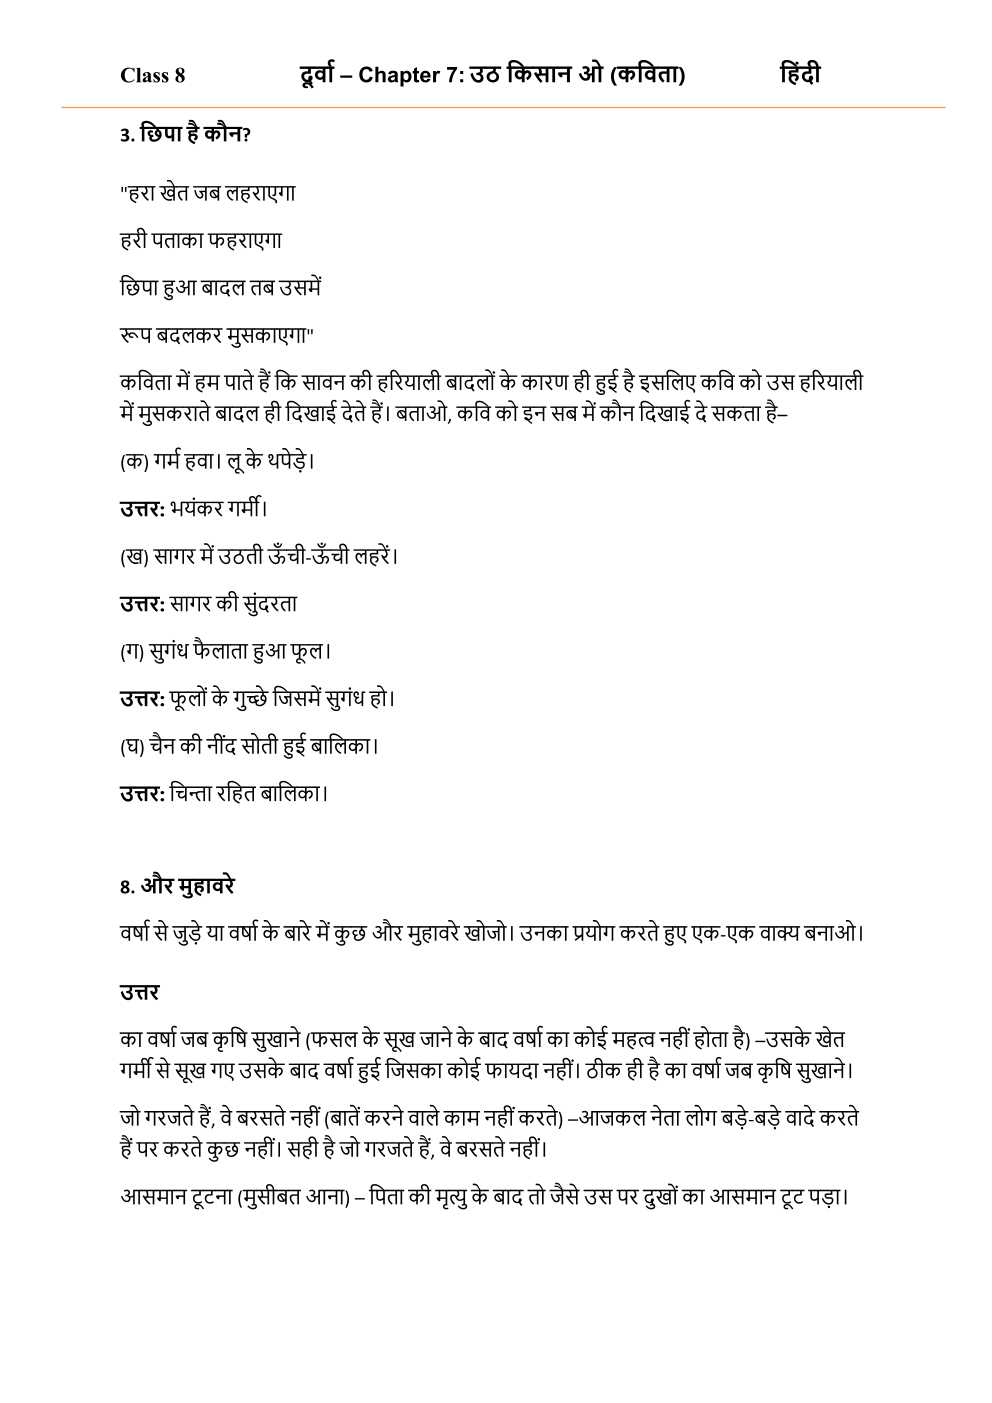 NCERT Solutions For Class 8 Hindi Durva Chapter 7